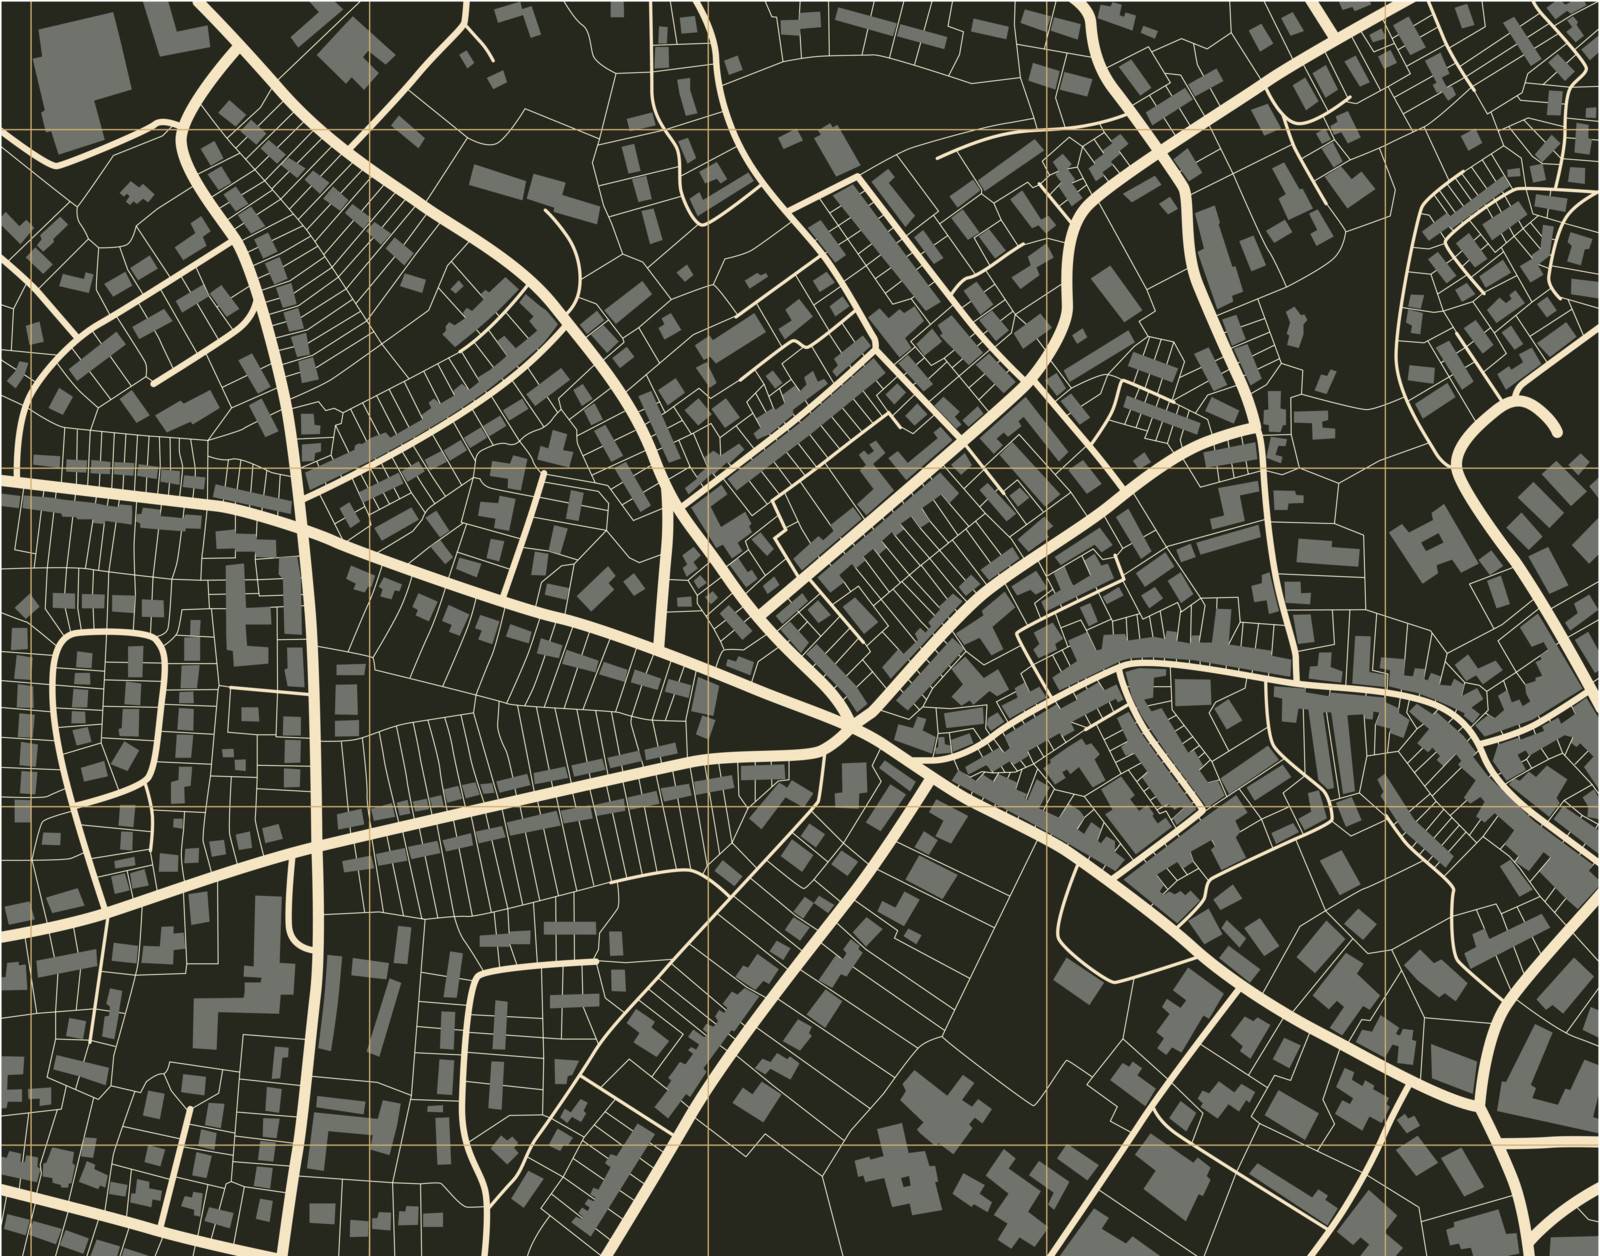 Editable vector illustration of a detailed generic street map without names